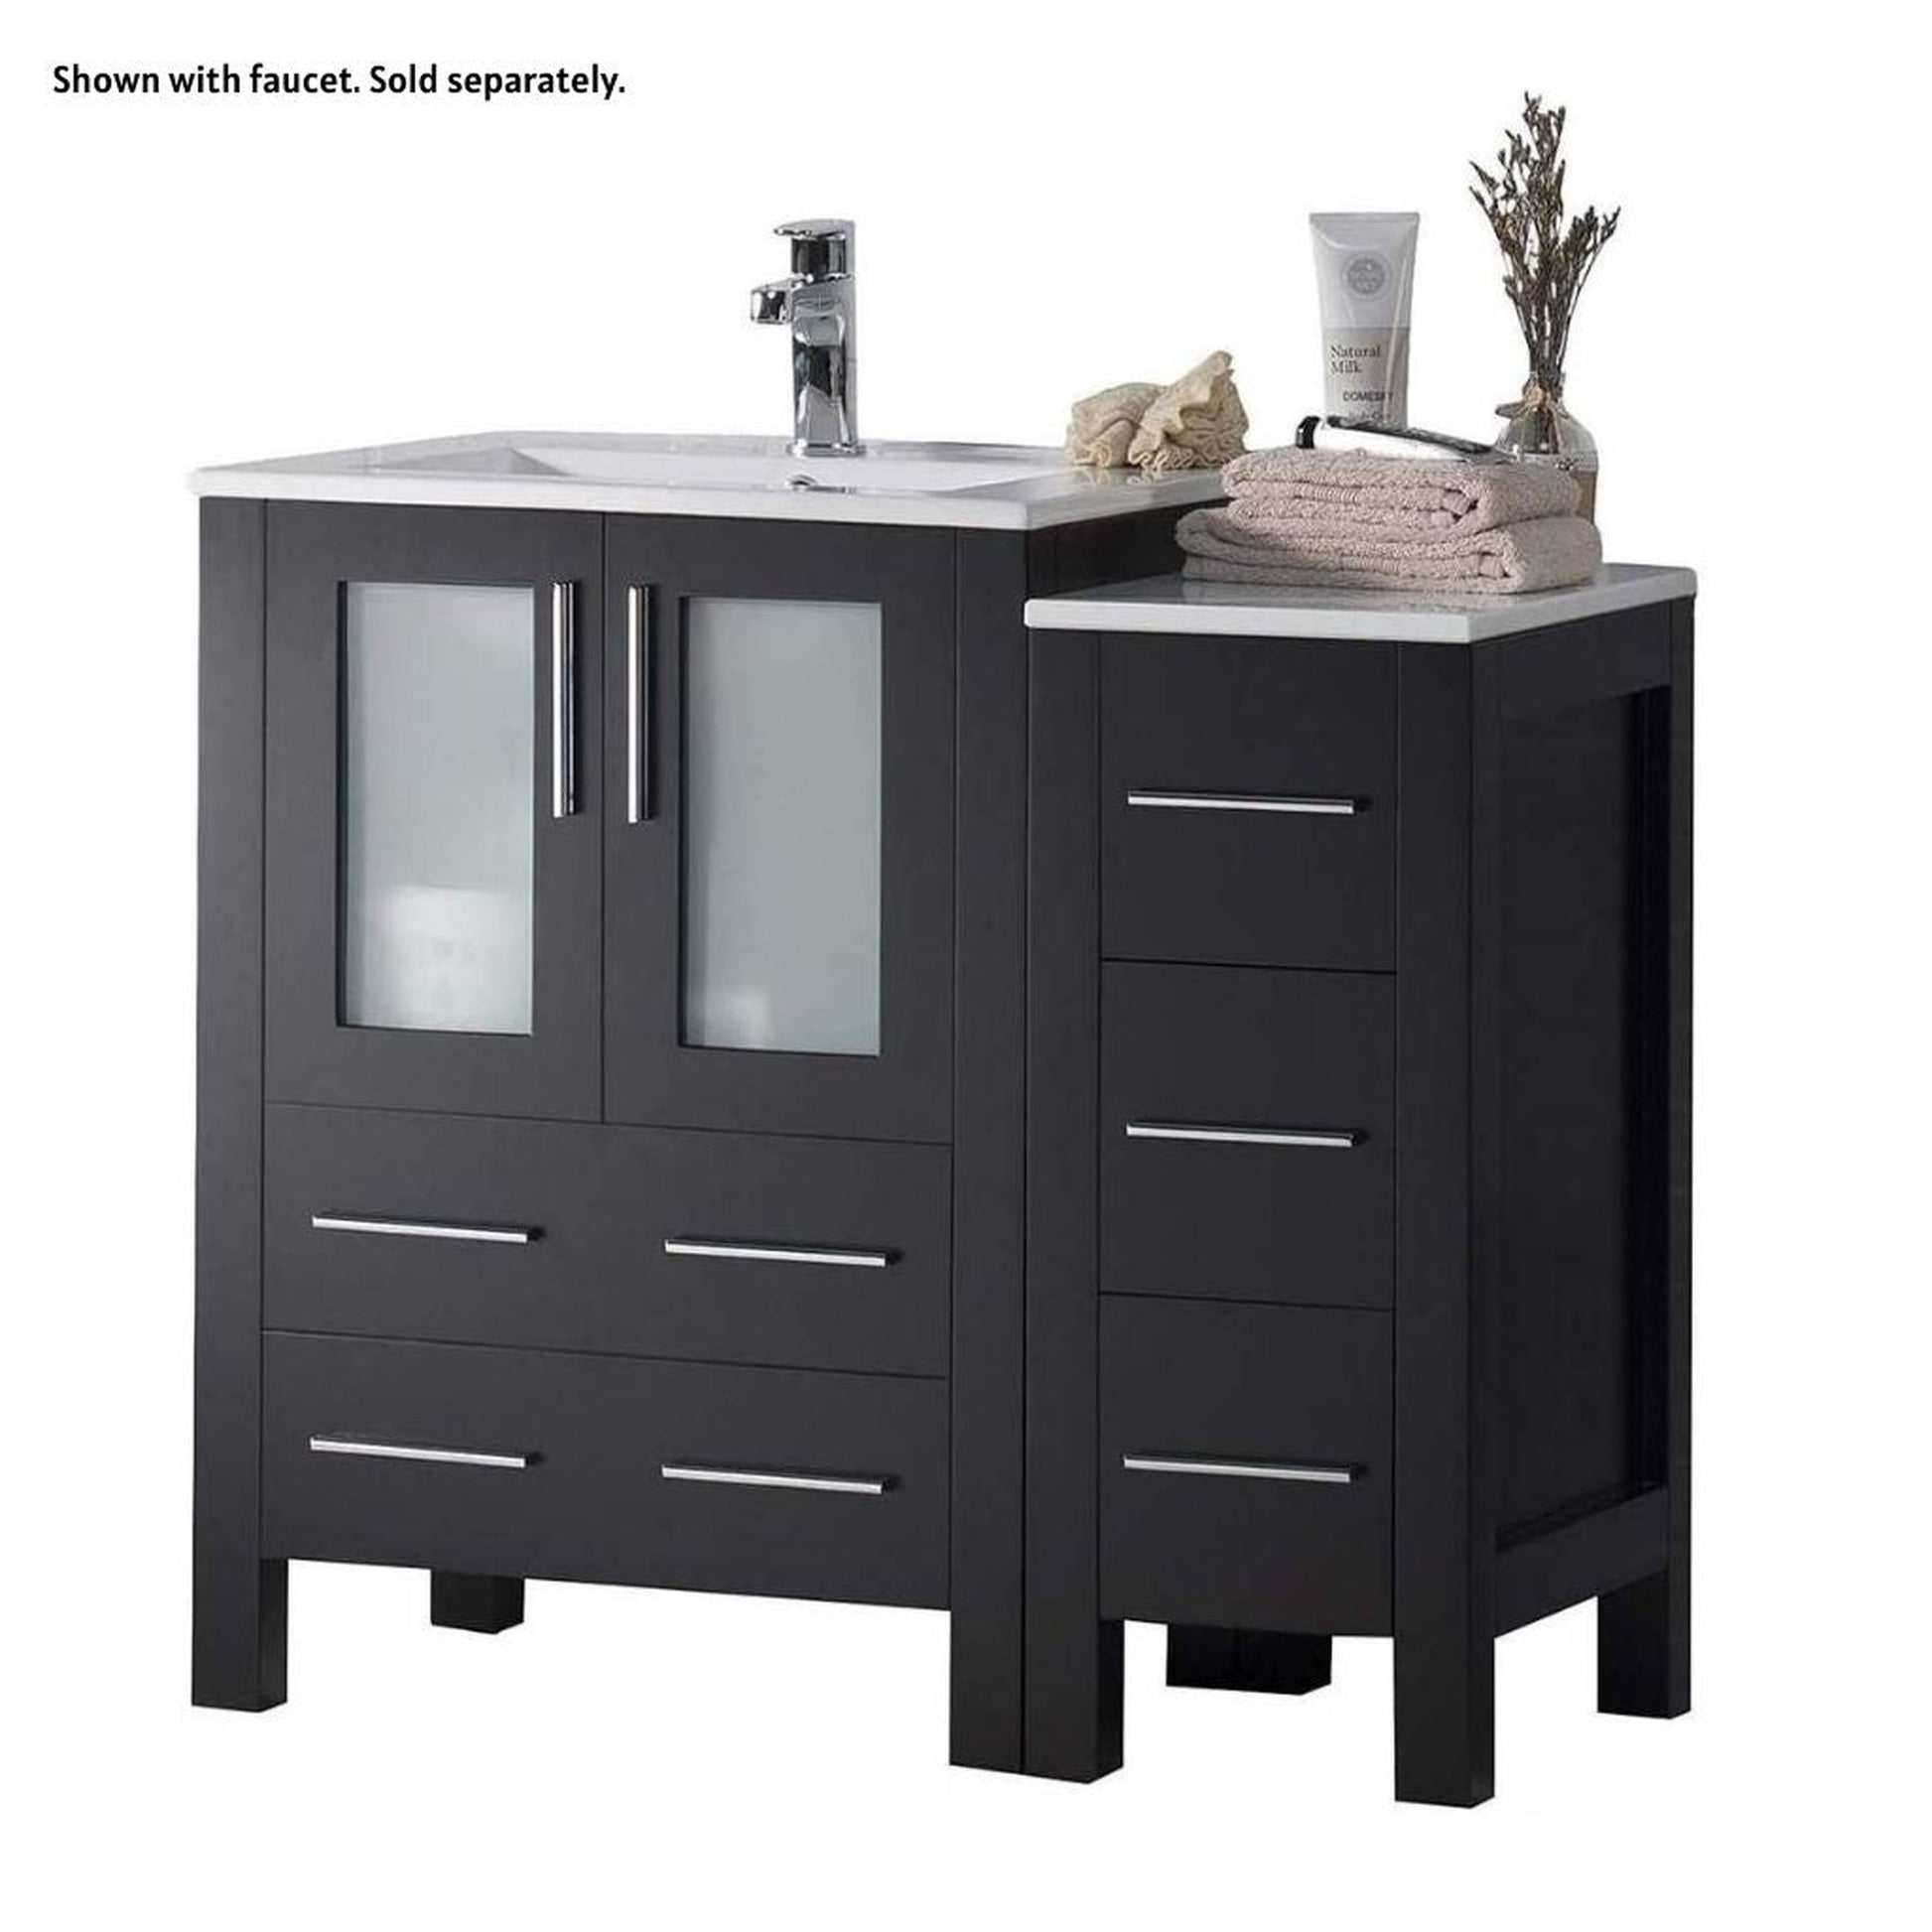 Blossom Sydney 36" Espresso Freestanding Vanity Set With Integrated Single Sink Ceramic Top and Side Cabinet